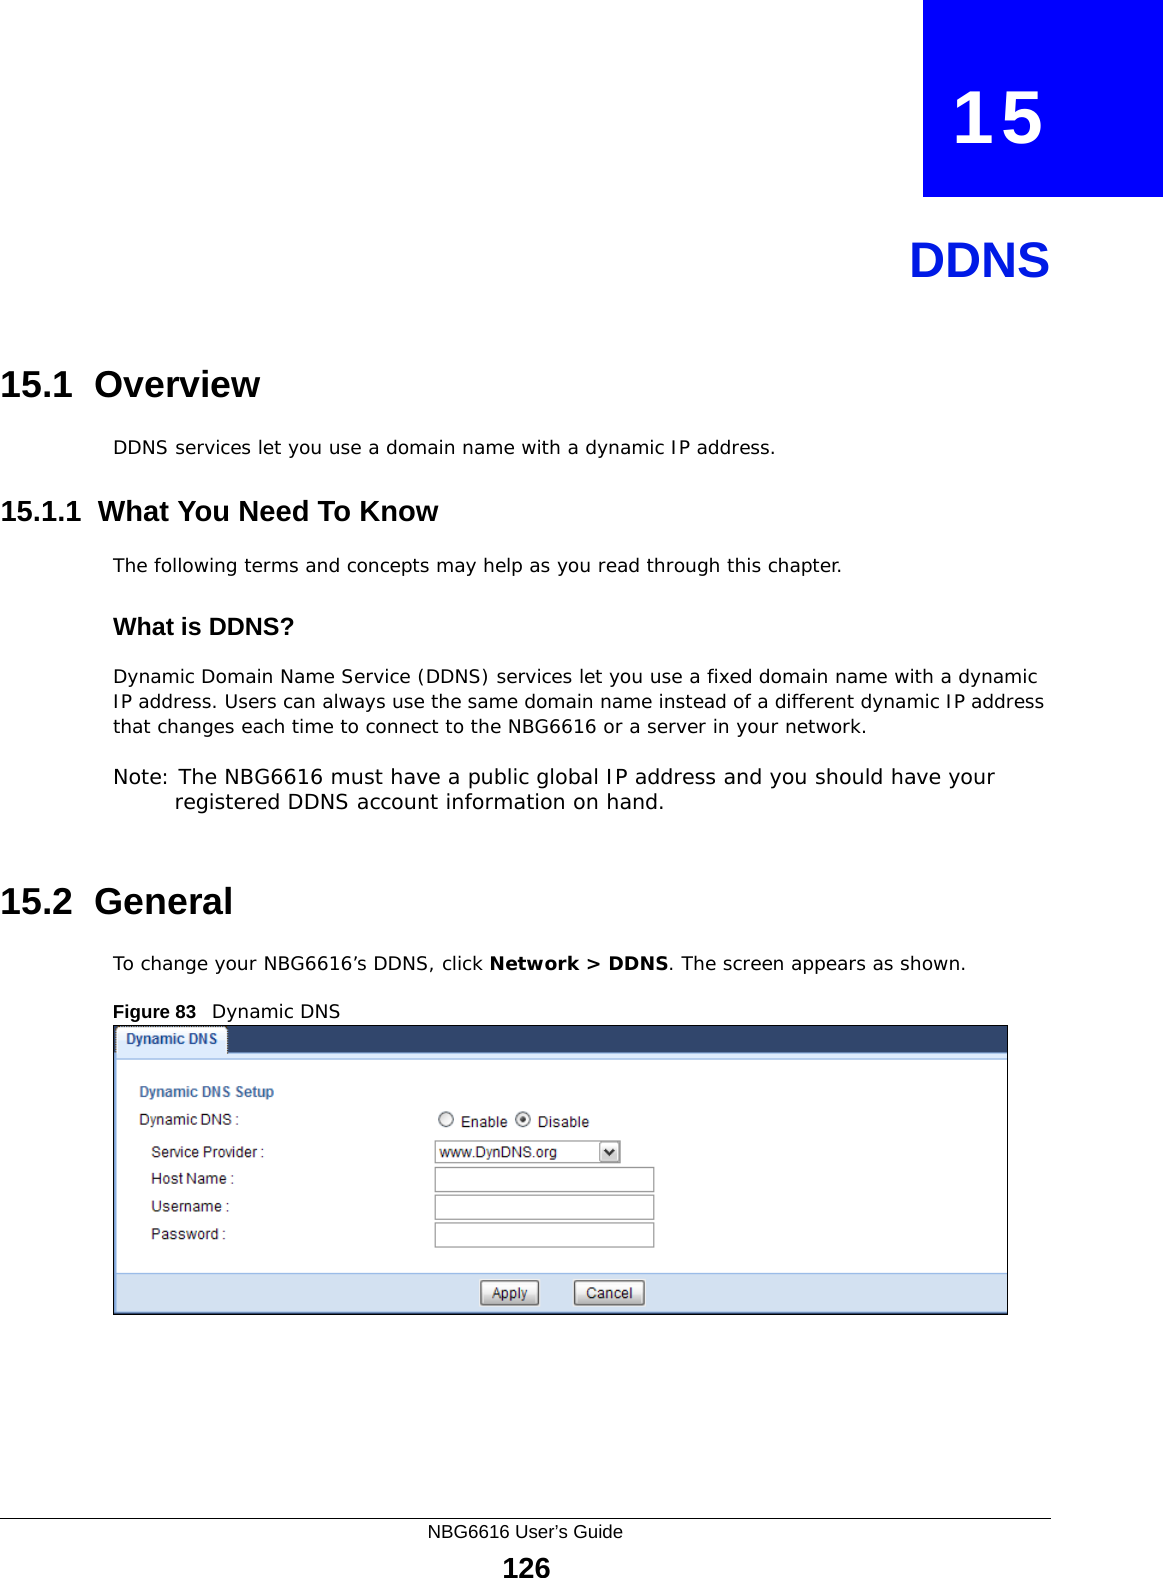 NBG6616 User’s Guide126CHAPTER   15DDNS15.1  Overview DDNS services let you use a domain name with a dynamic IP address.15.1.1  What You Need To KnowThe following terms and concepts may help as you read through this chapter.What is DDNS?Dynamic Domain Name Service (DDNS) services let you use a fixed domain name with a dynamic IP address. Users can always use the same domain name instead of a different dynamic IP address that changes each time to connect to the NBG6616 or a server in your network.Note: The NBG6616 must have a public global IP address and you should have your registered DDNS account information on hand.15.2  General   To change your NBG6616’s DDNS, click Network &gt; DDNS. The screen appears as shown.Figure 83   Dynamic DNS